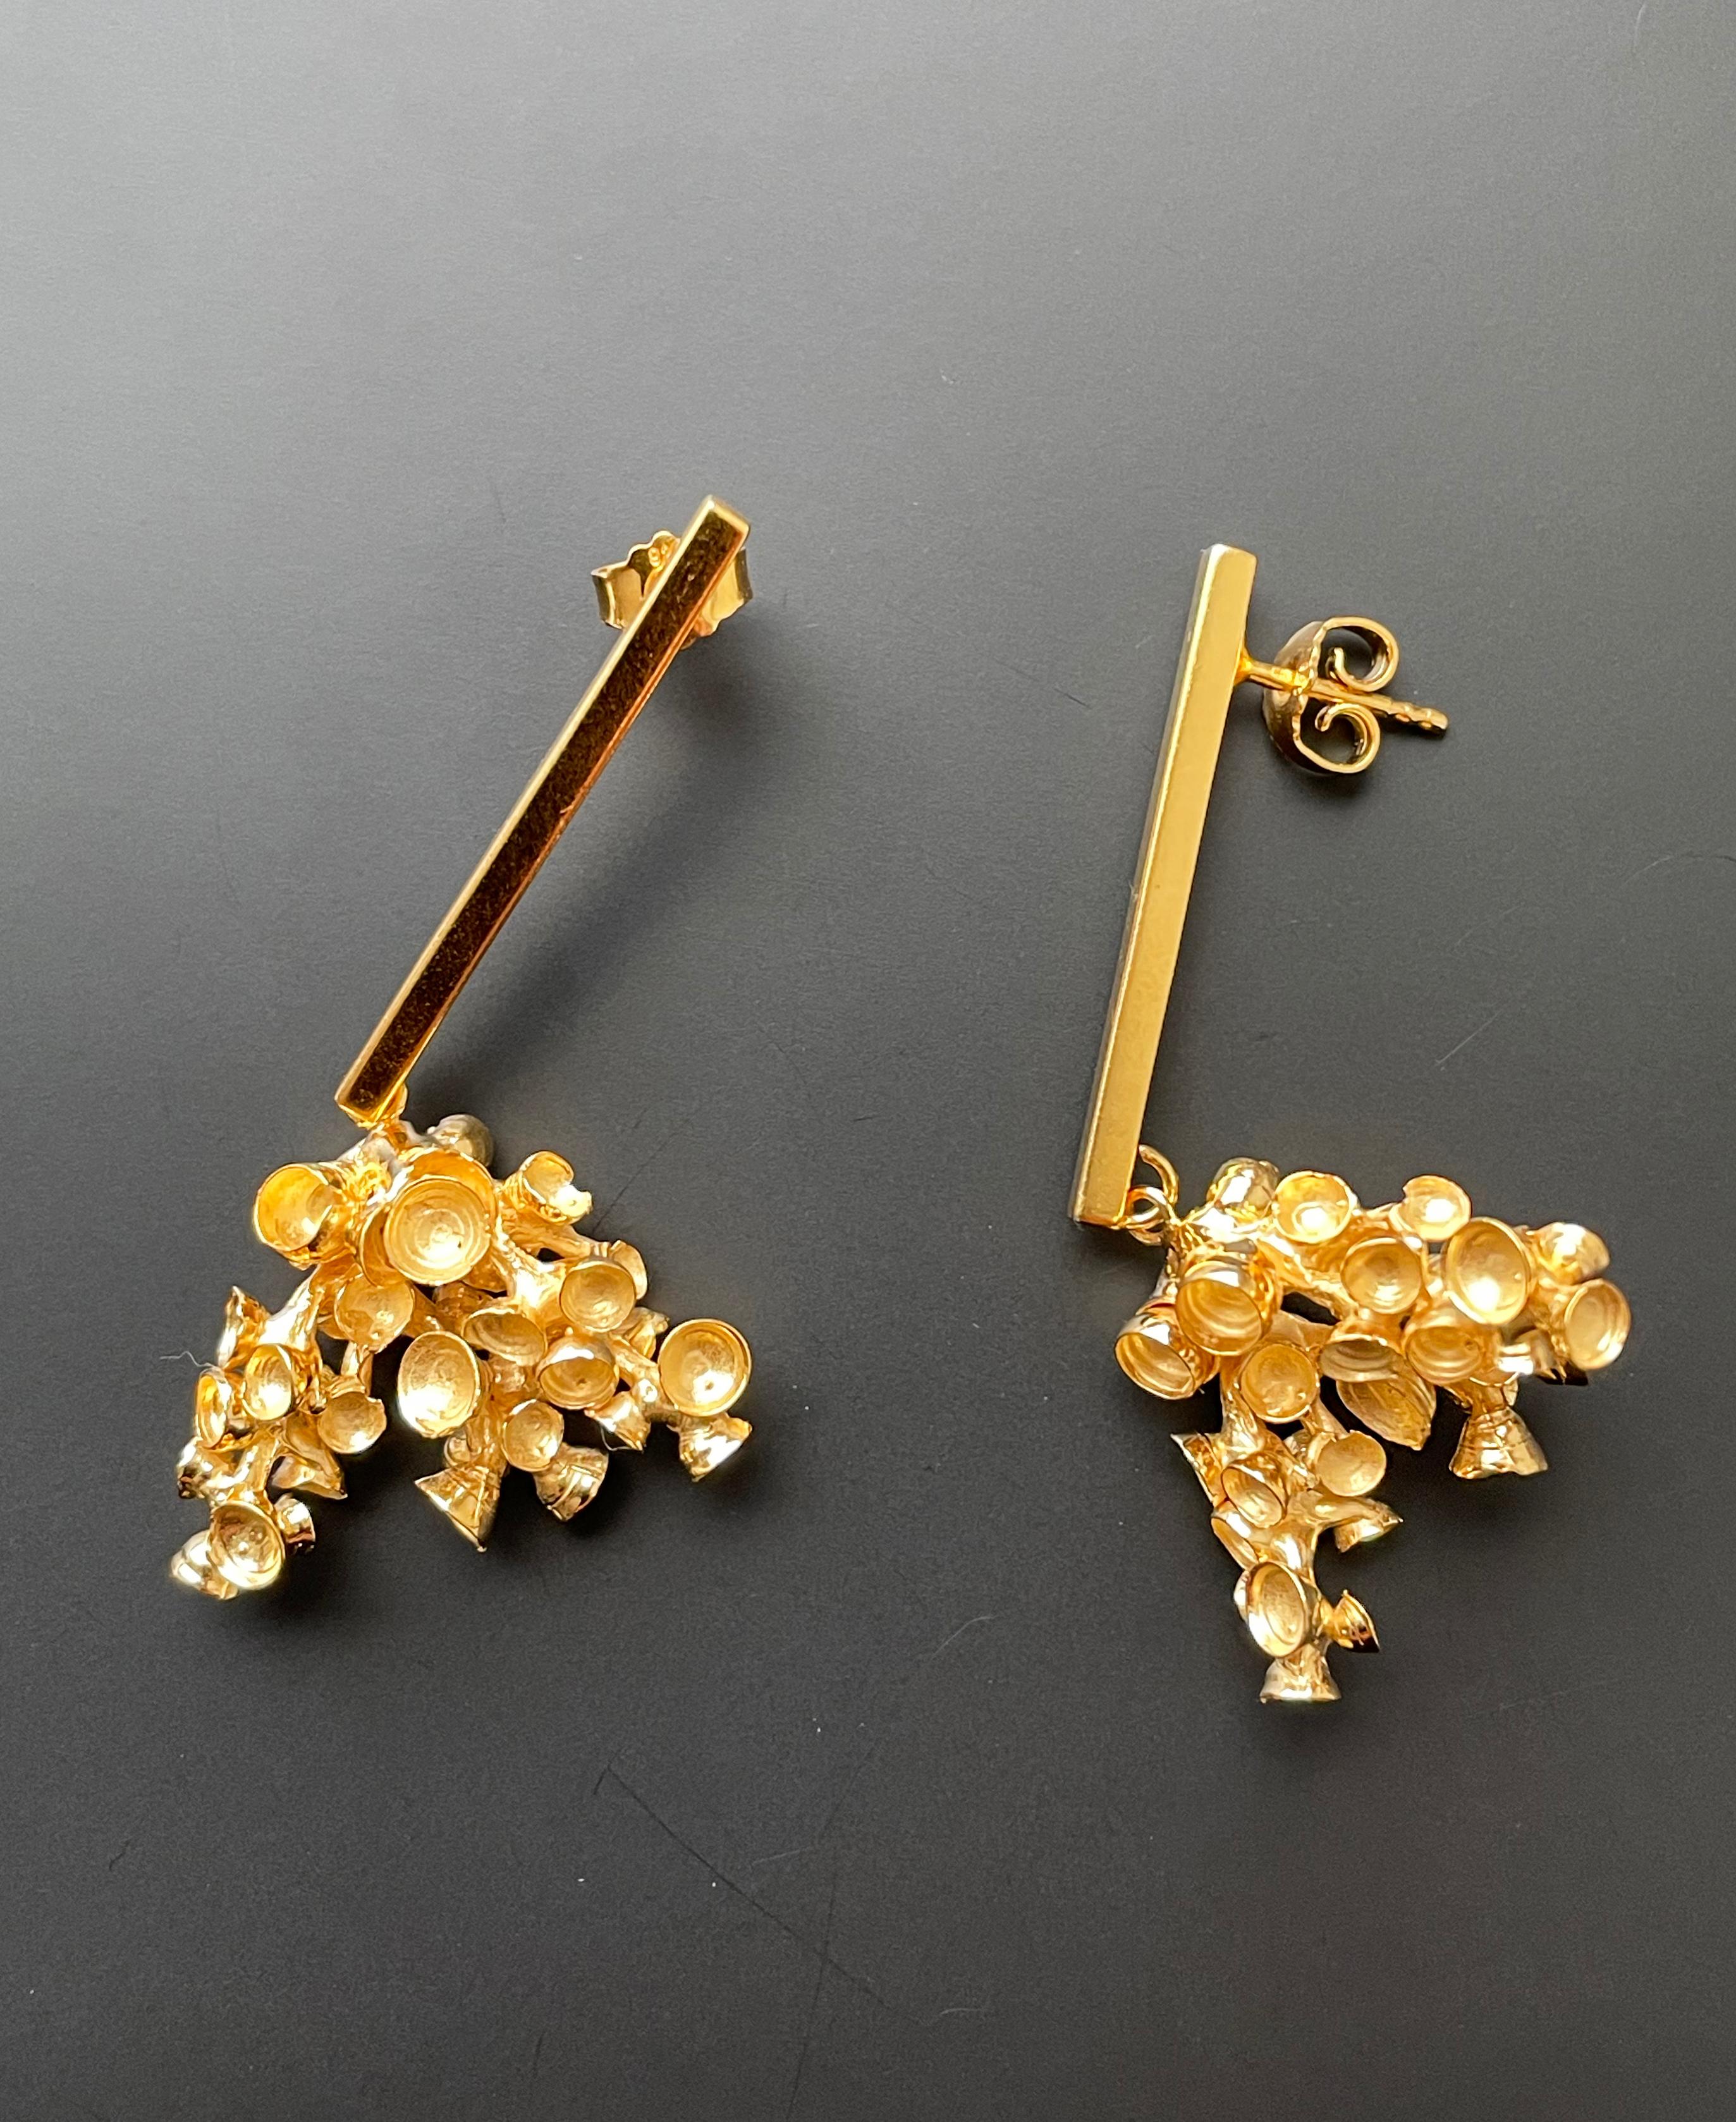 Unique, beautifully designed silver-gilt earrings fascinate with their attractive shape reminiscent of spectacular corals.
 
This handcrafted jewelry is not only an elegant and inspiring detail of the style, but it also gives pleasant confidence and